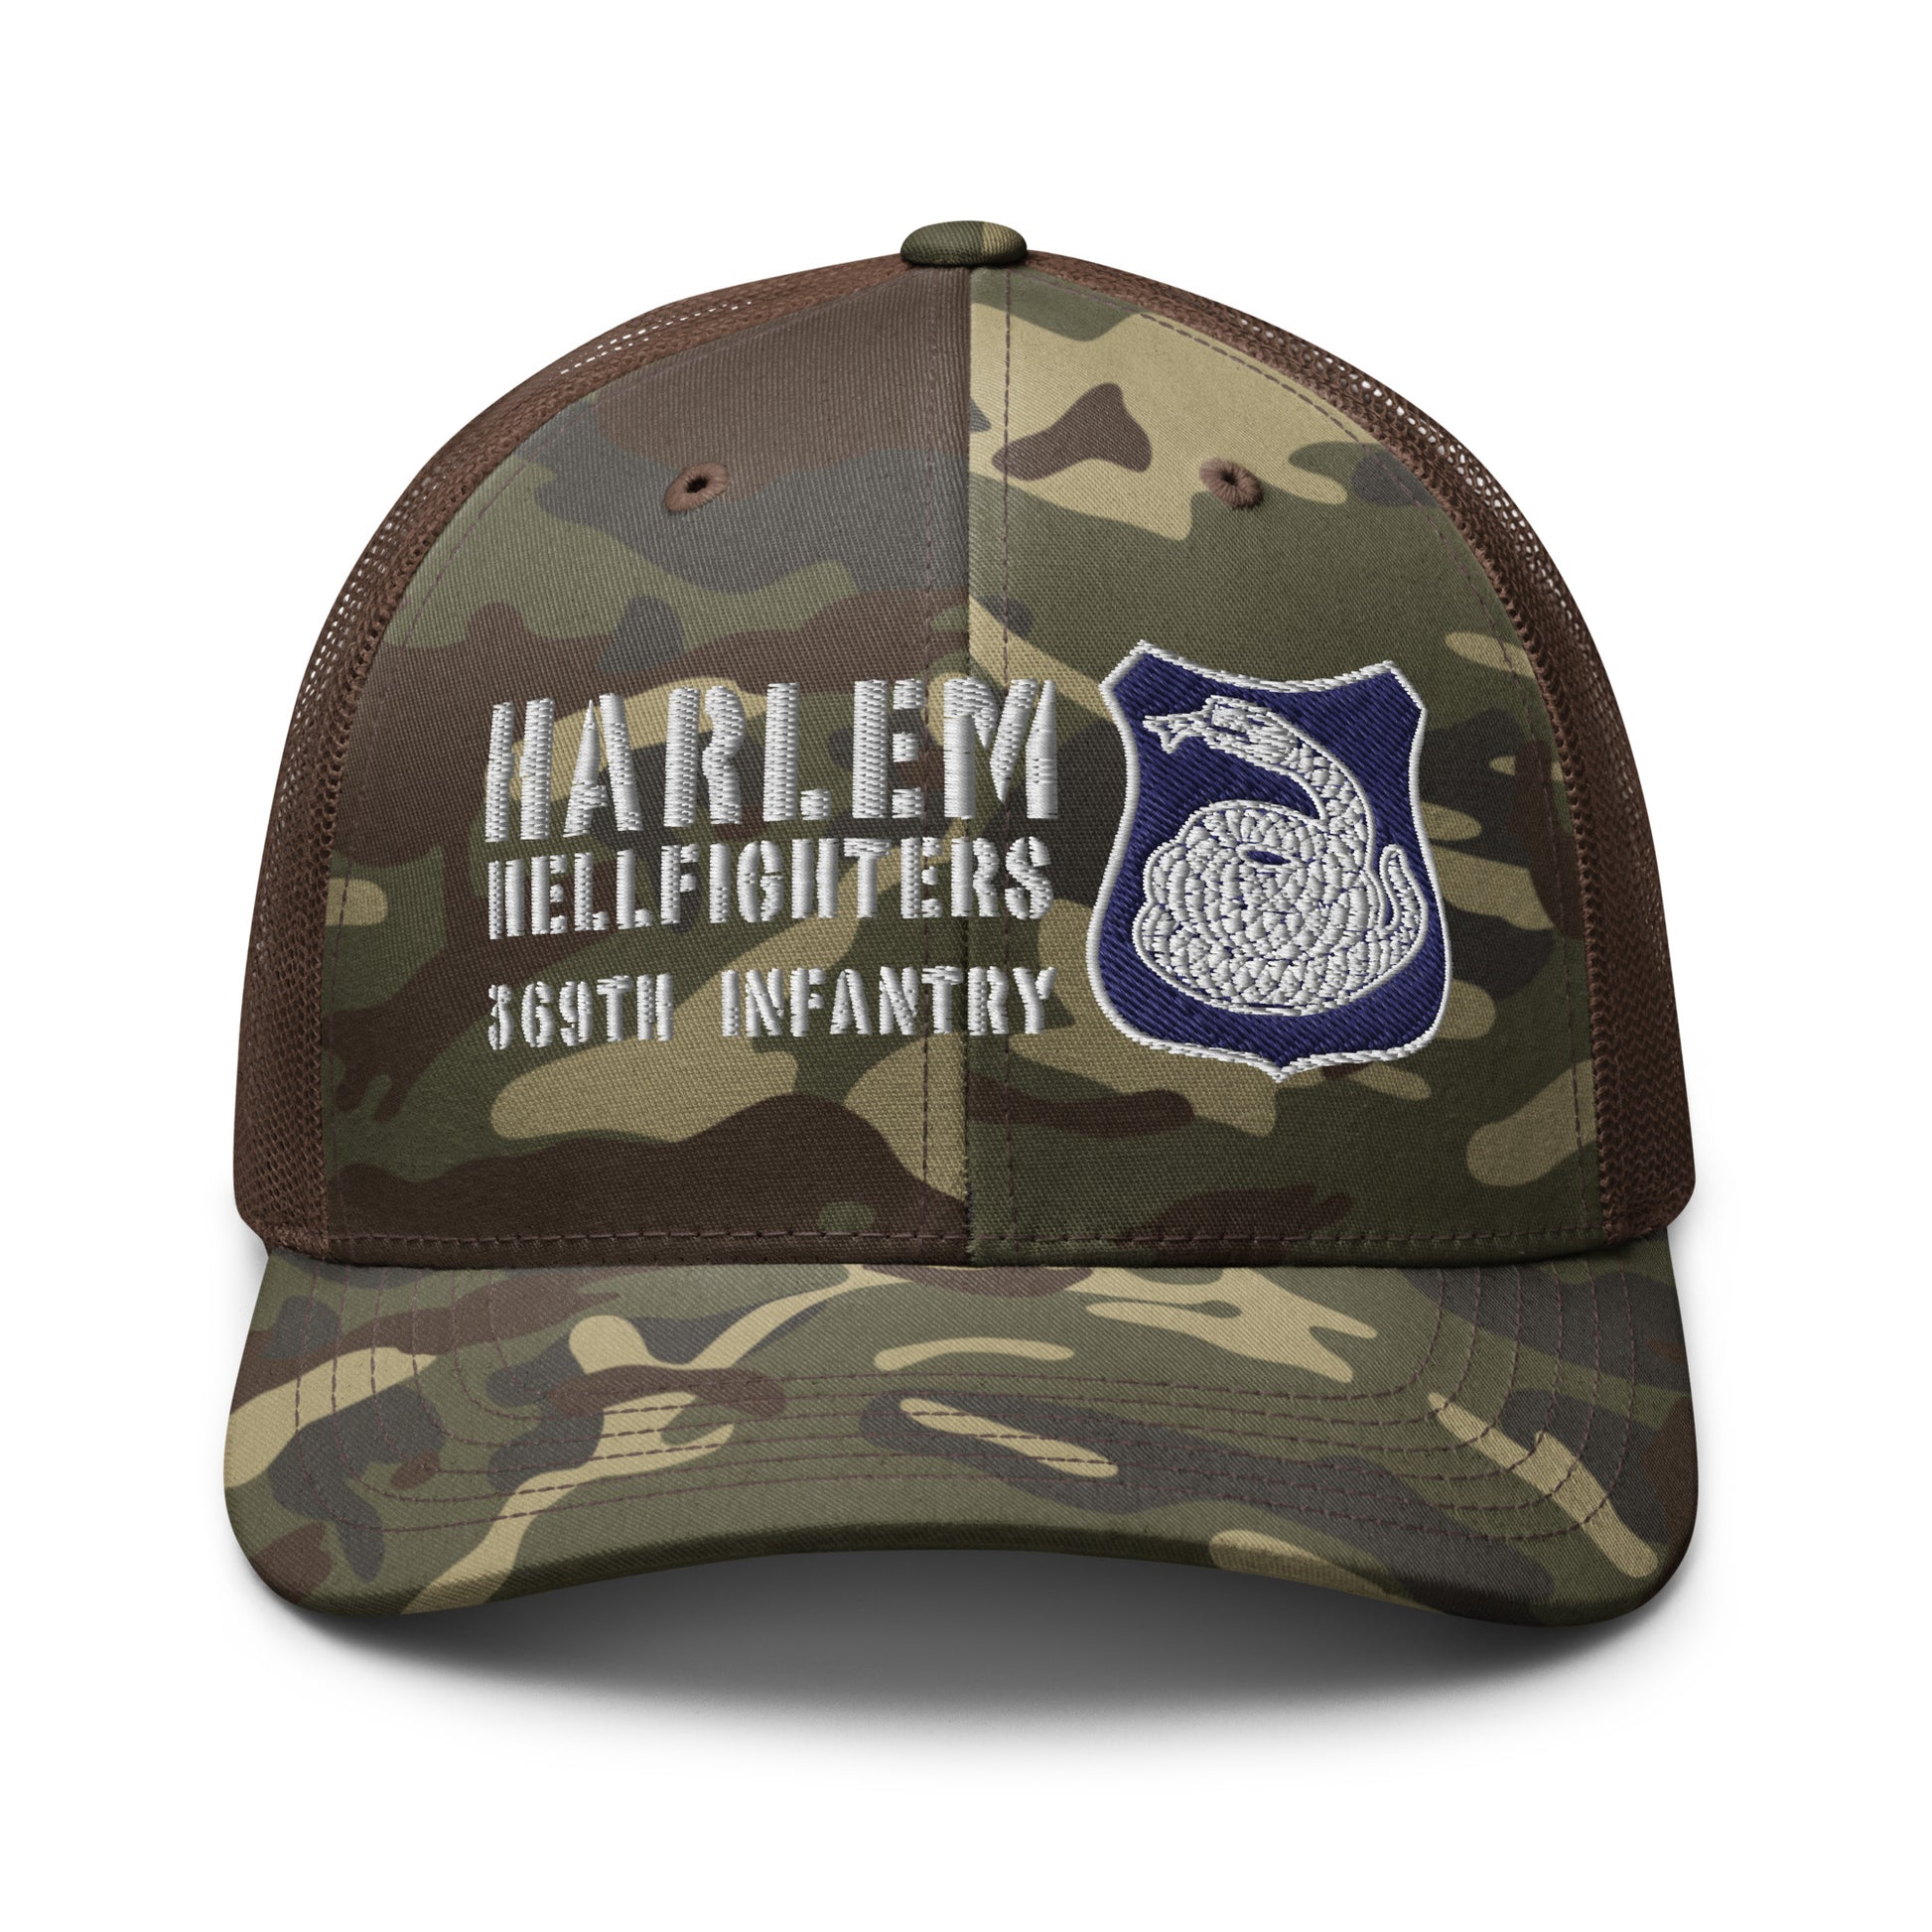 light color camo trucker hat with rattlesnake crest and text reading harlem hellfighters